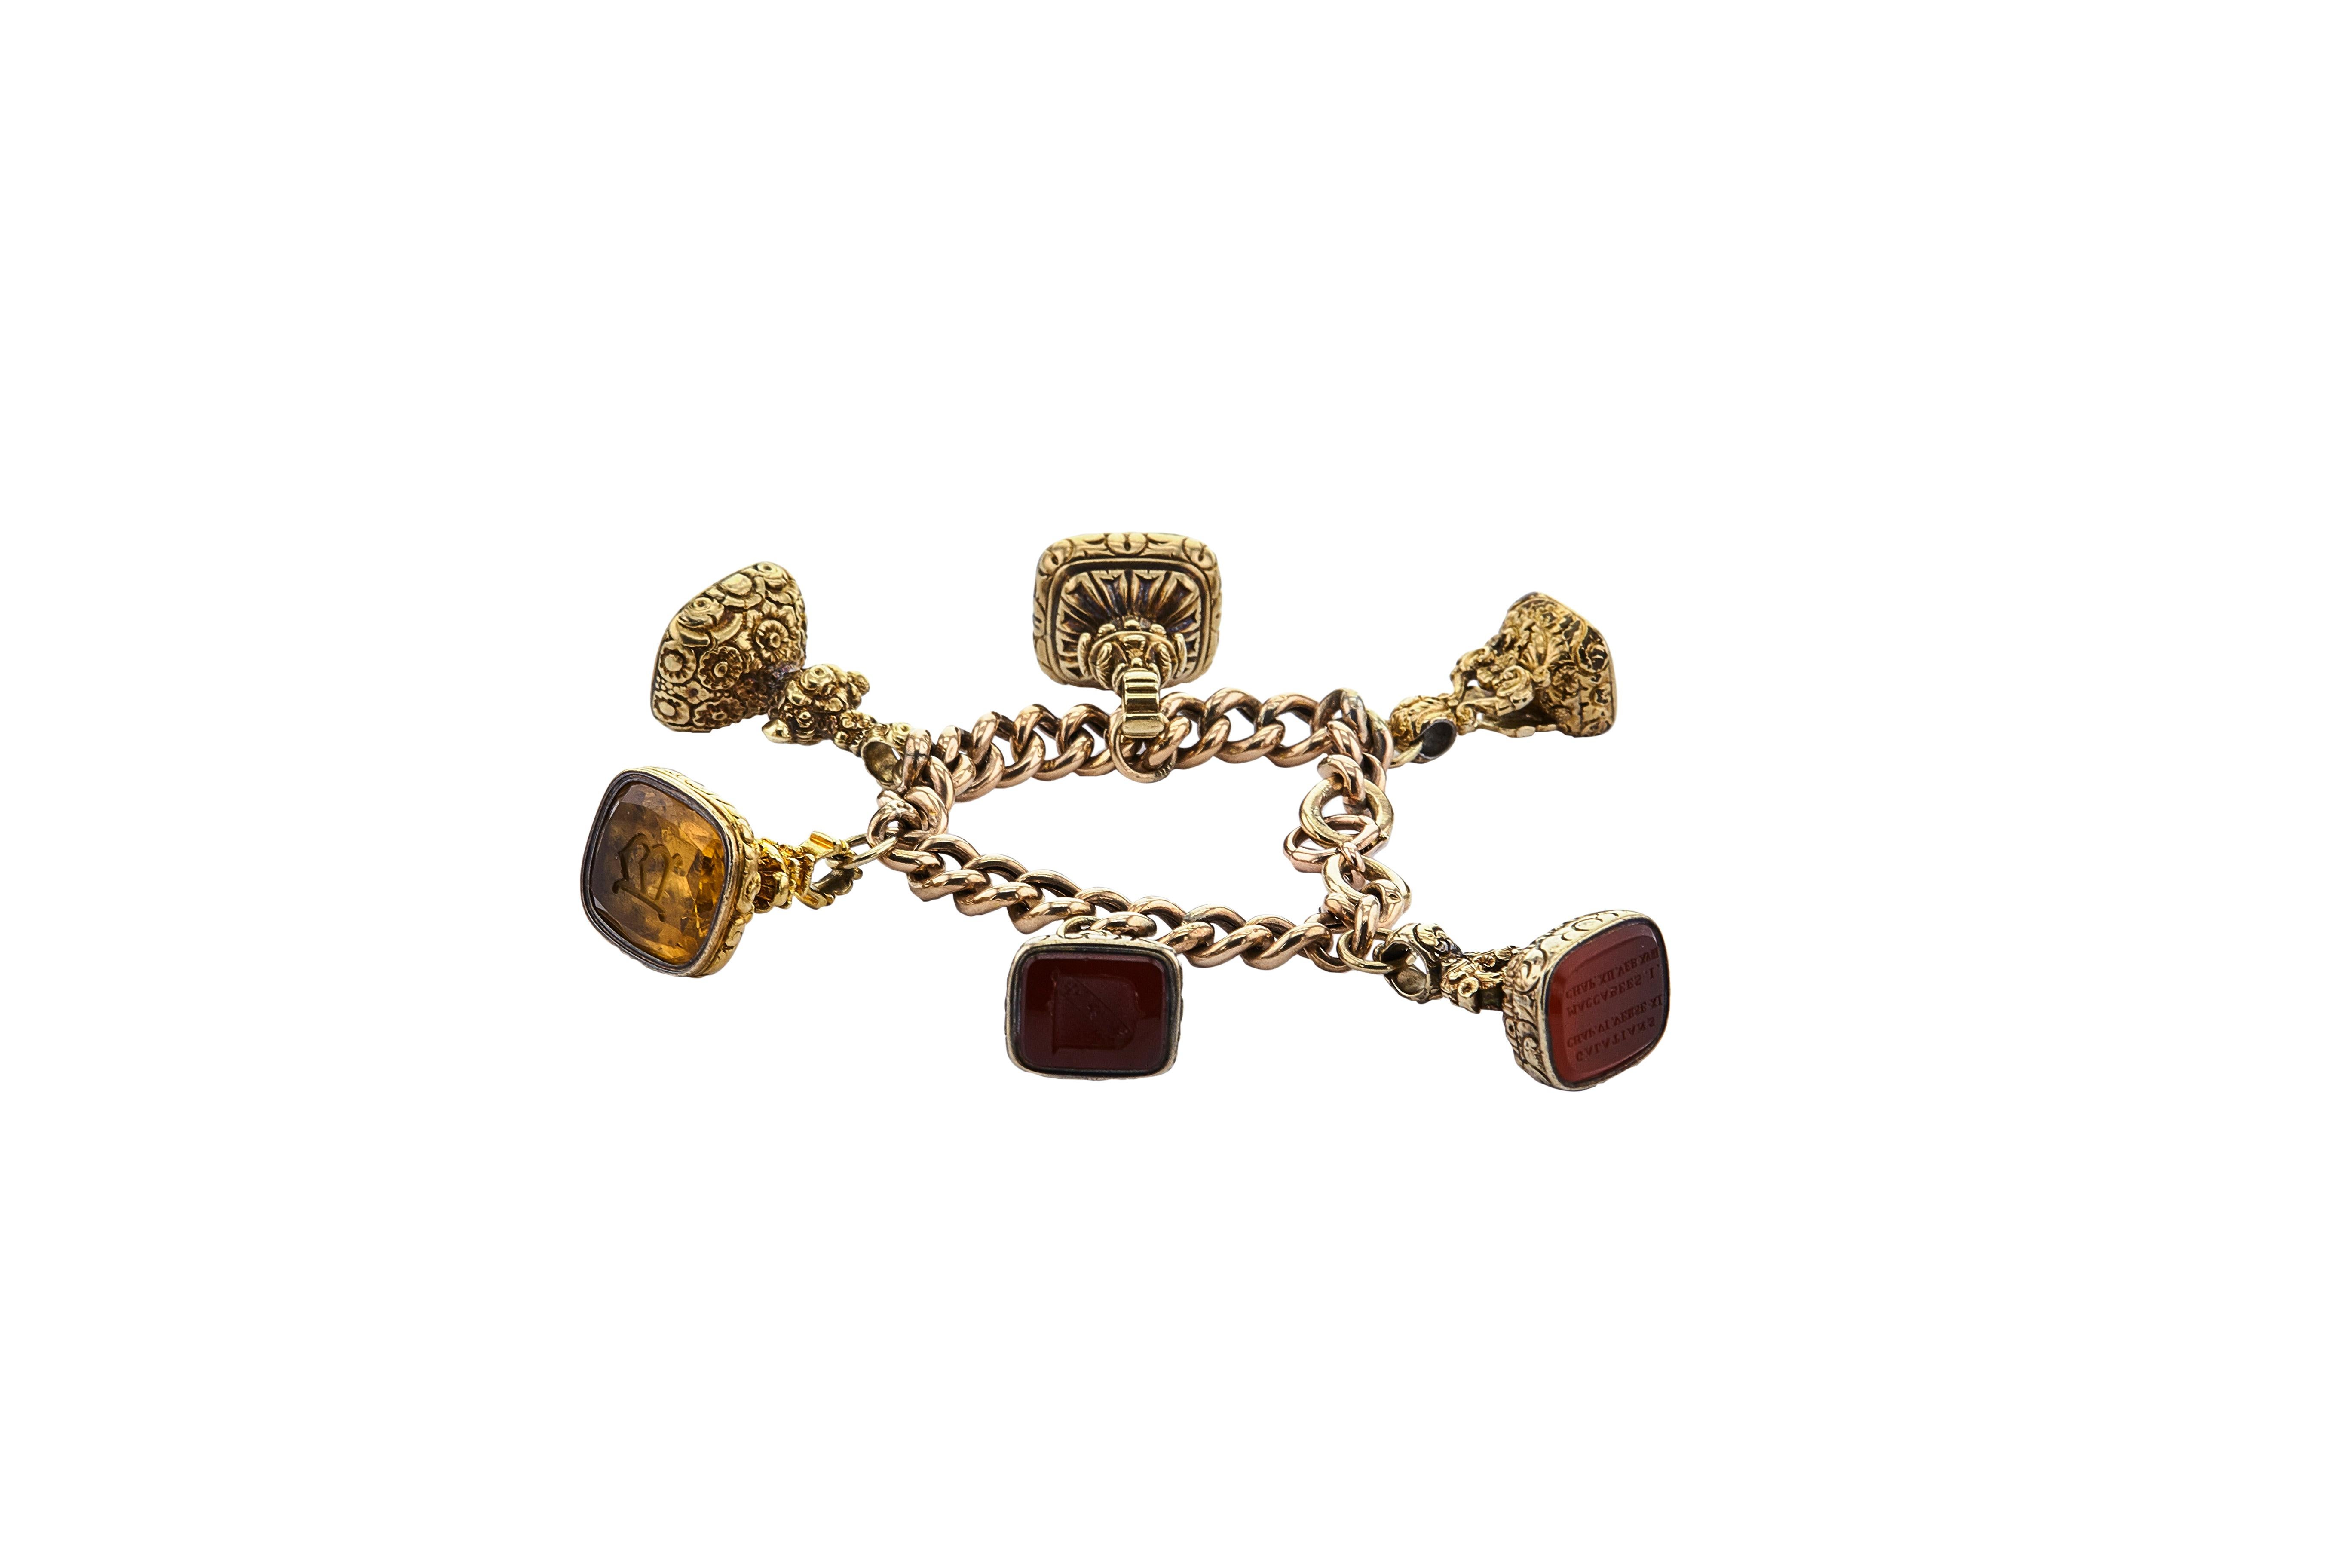 An antique charm bracelet comprising of six fancifully designed seals, each set with an intaglio engraving carved into various stones such as carnelian and quartz. The seals hang from an antique rounded curb bracelet measuring 7 inches. Crafted in 9